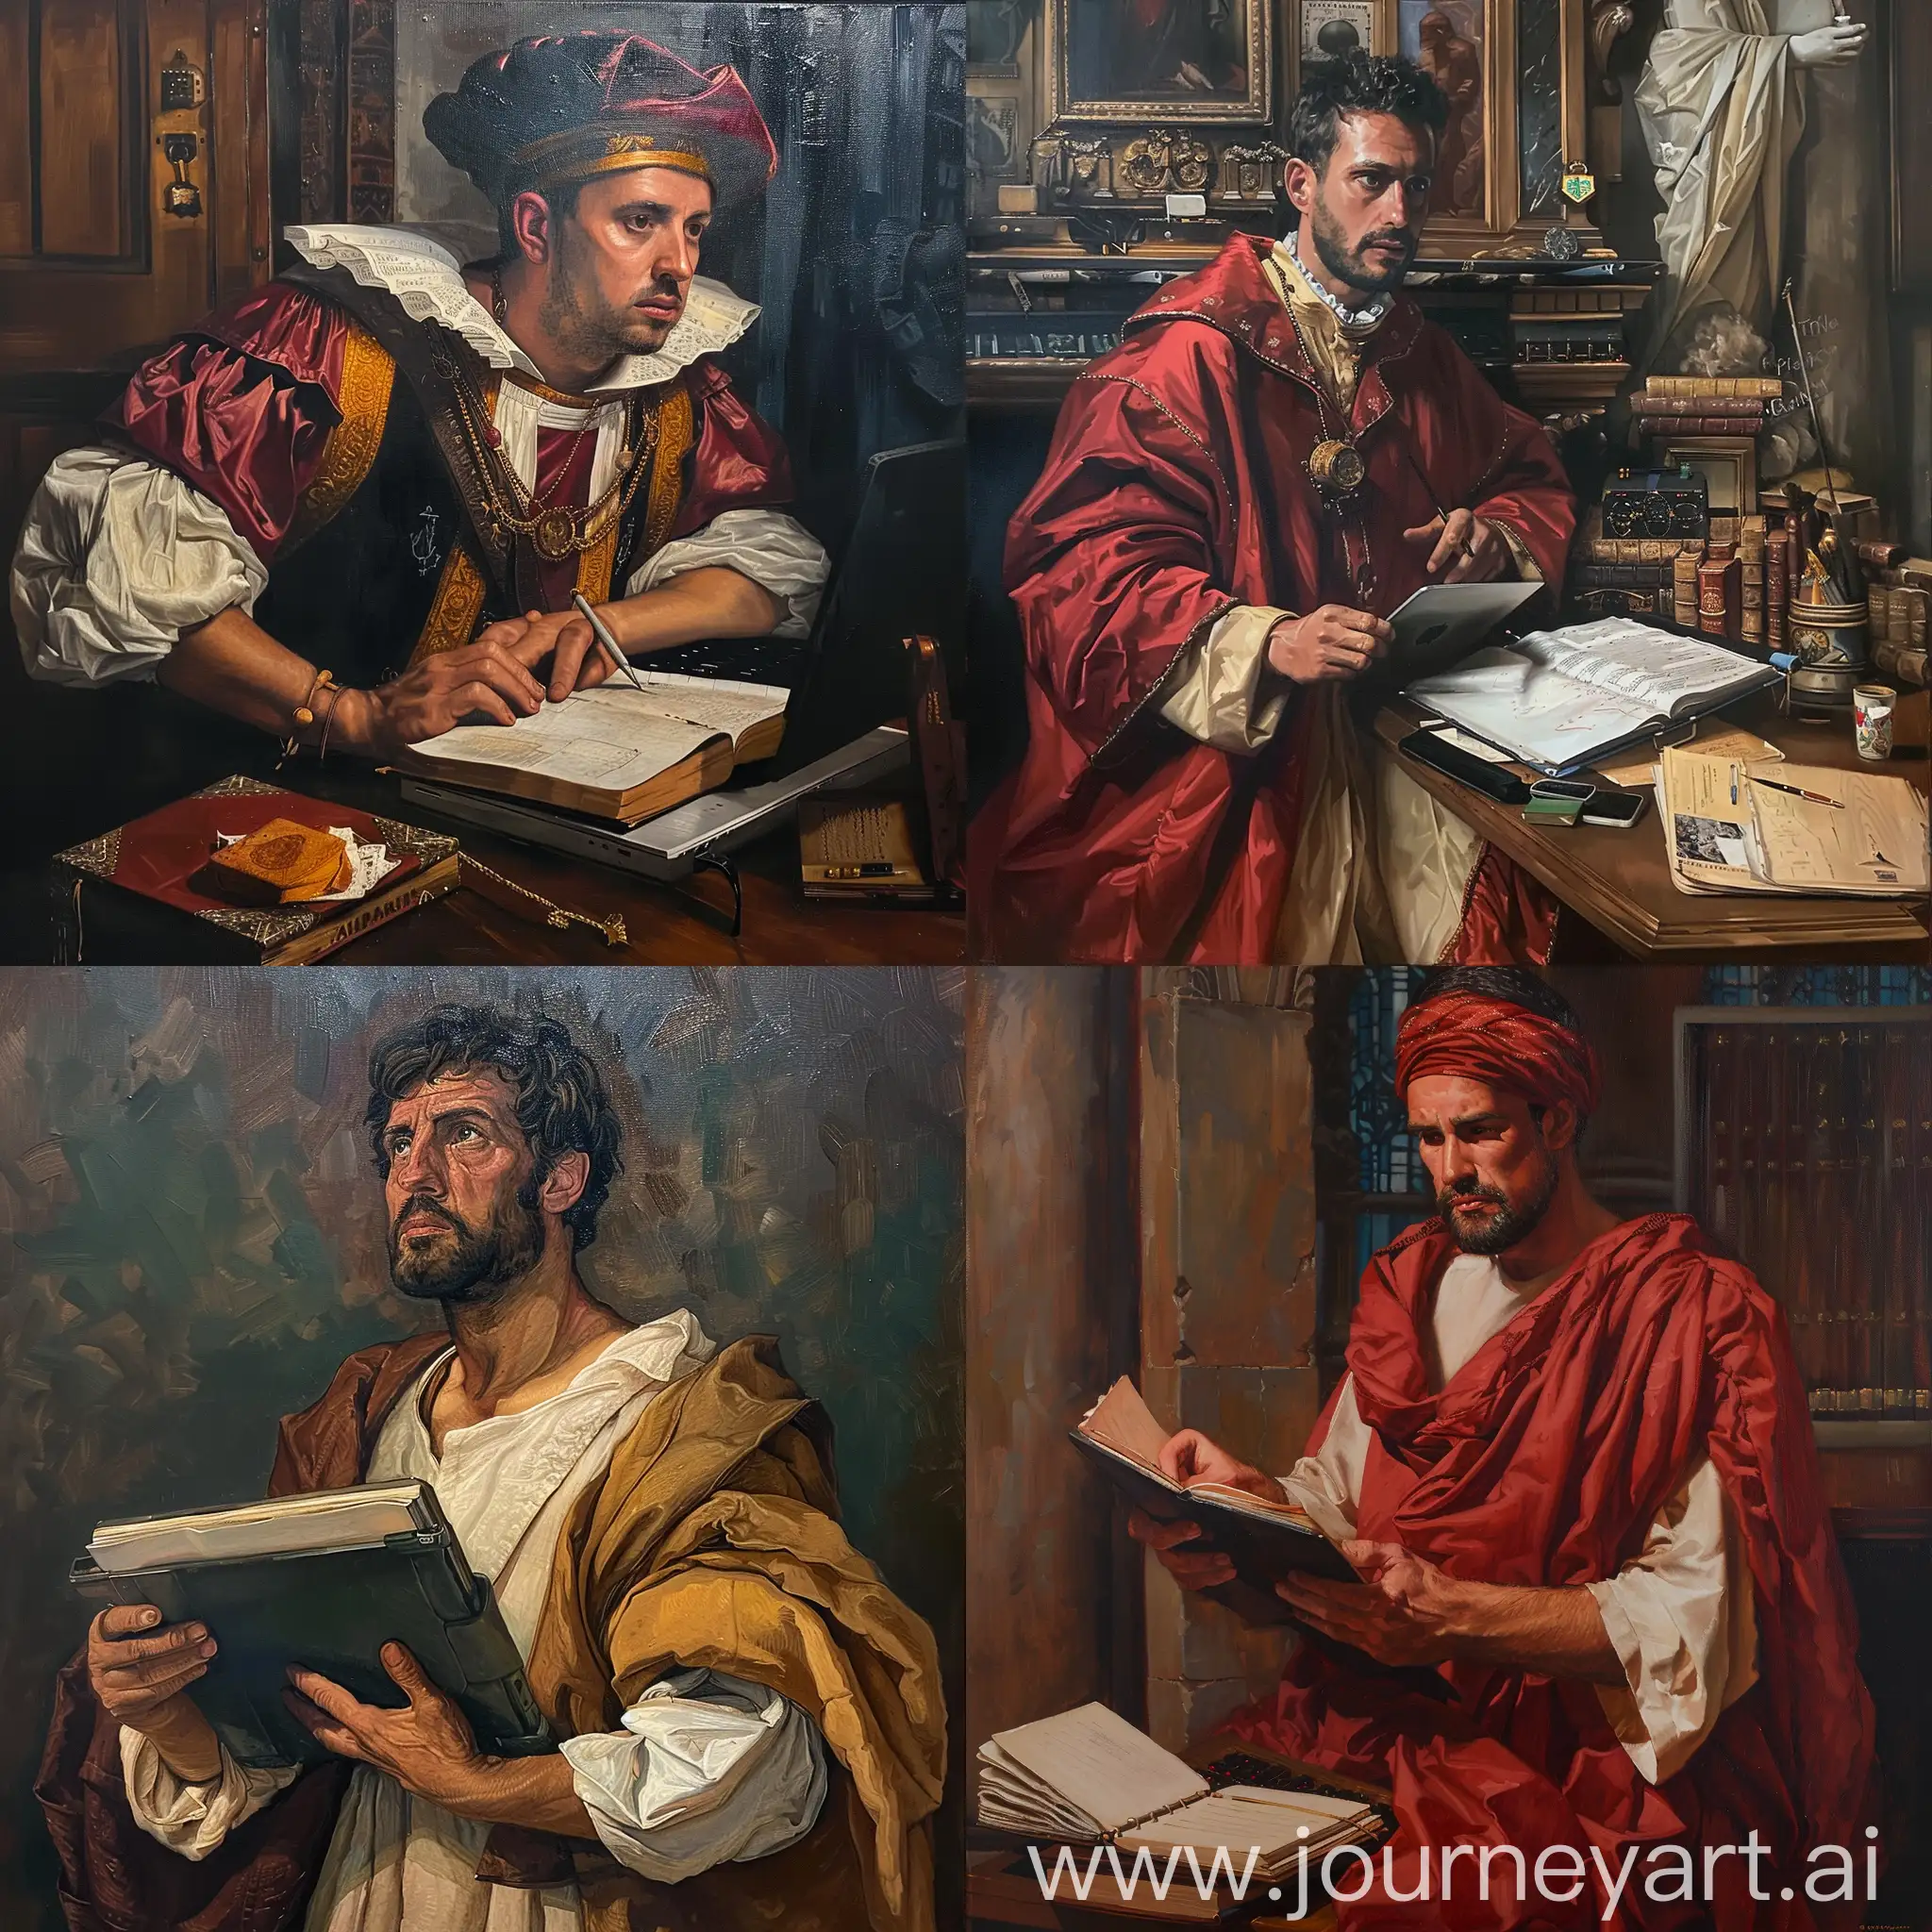 The I.T. guy presents his project beautifully, oil painting, renaissance style

